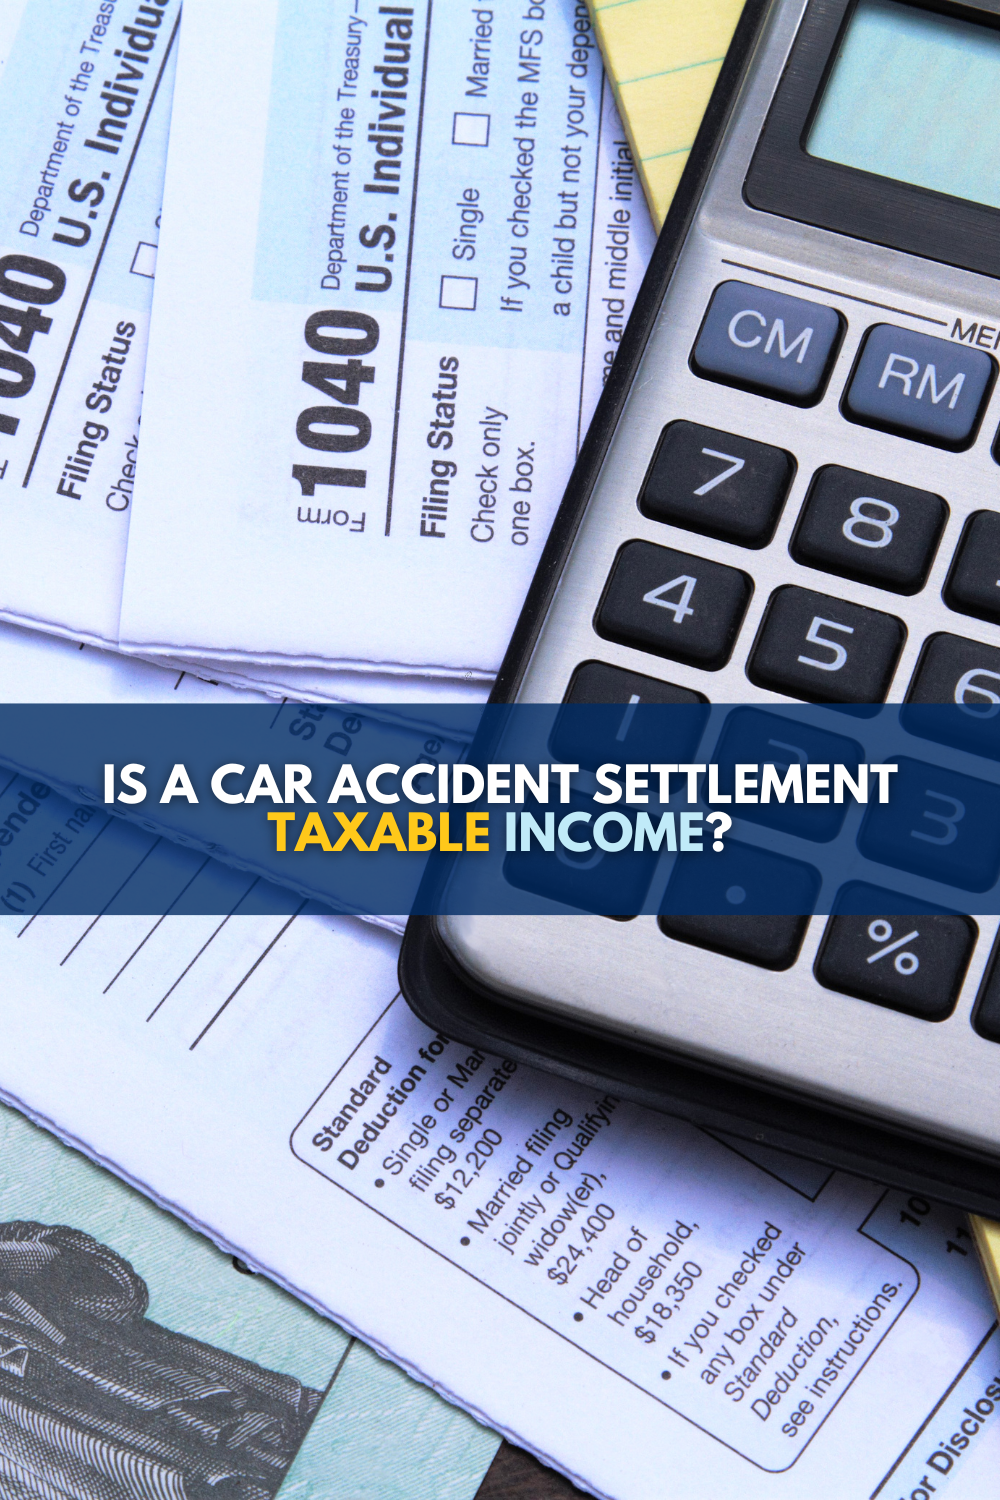 Is a Car Accident Settlement Taxable Income in Michigan?